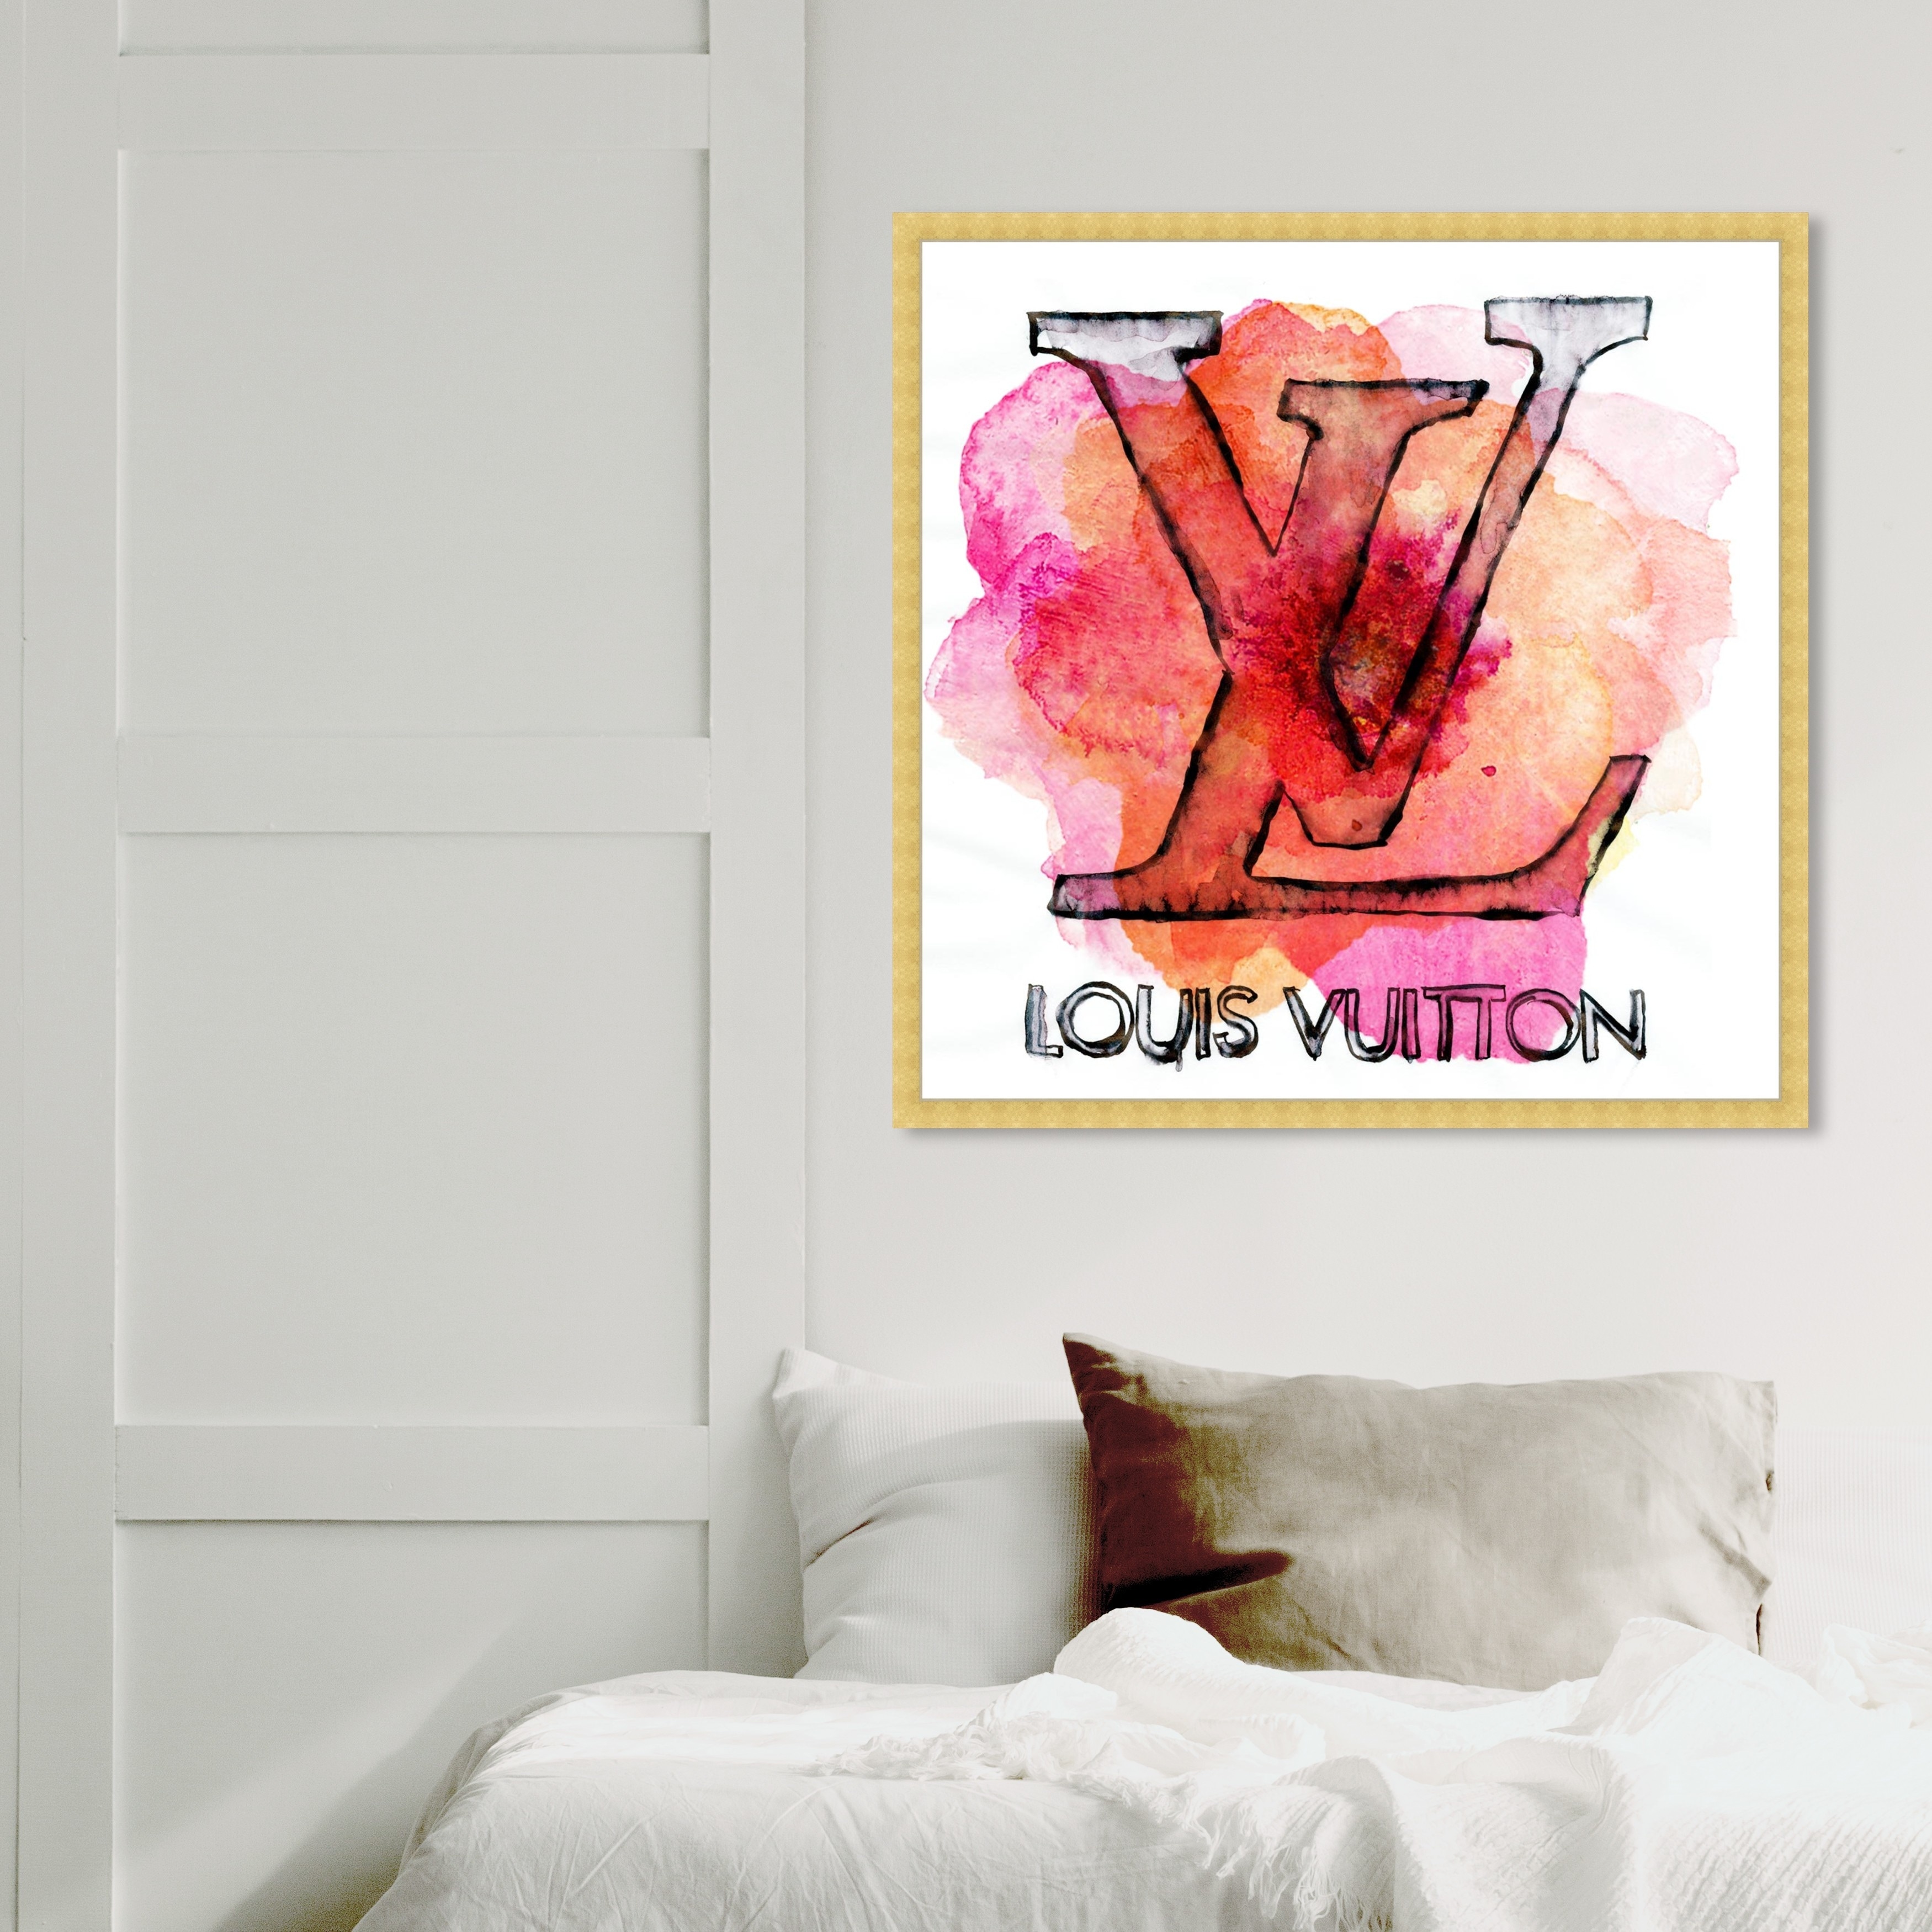 Oliver Gal 'LV Petals' Fashion and Glam Wall Art Framed Print